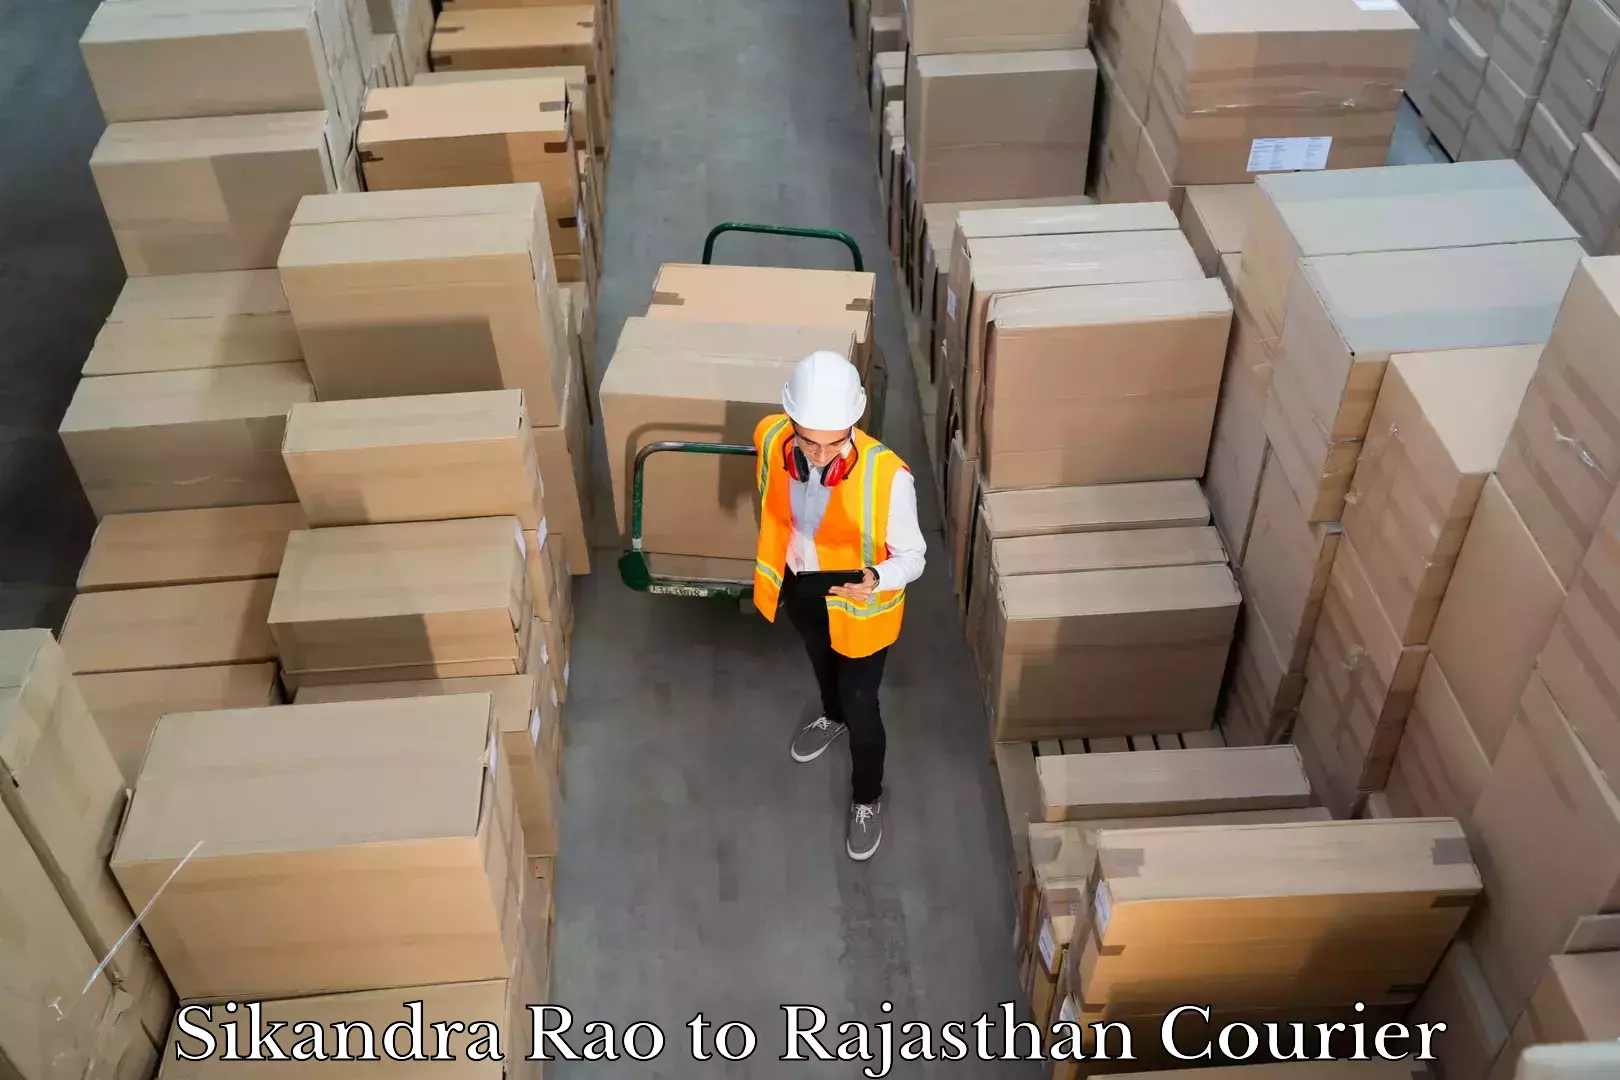 Luggage shipment specialists Sikandra Rao to Rajasthan